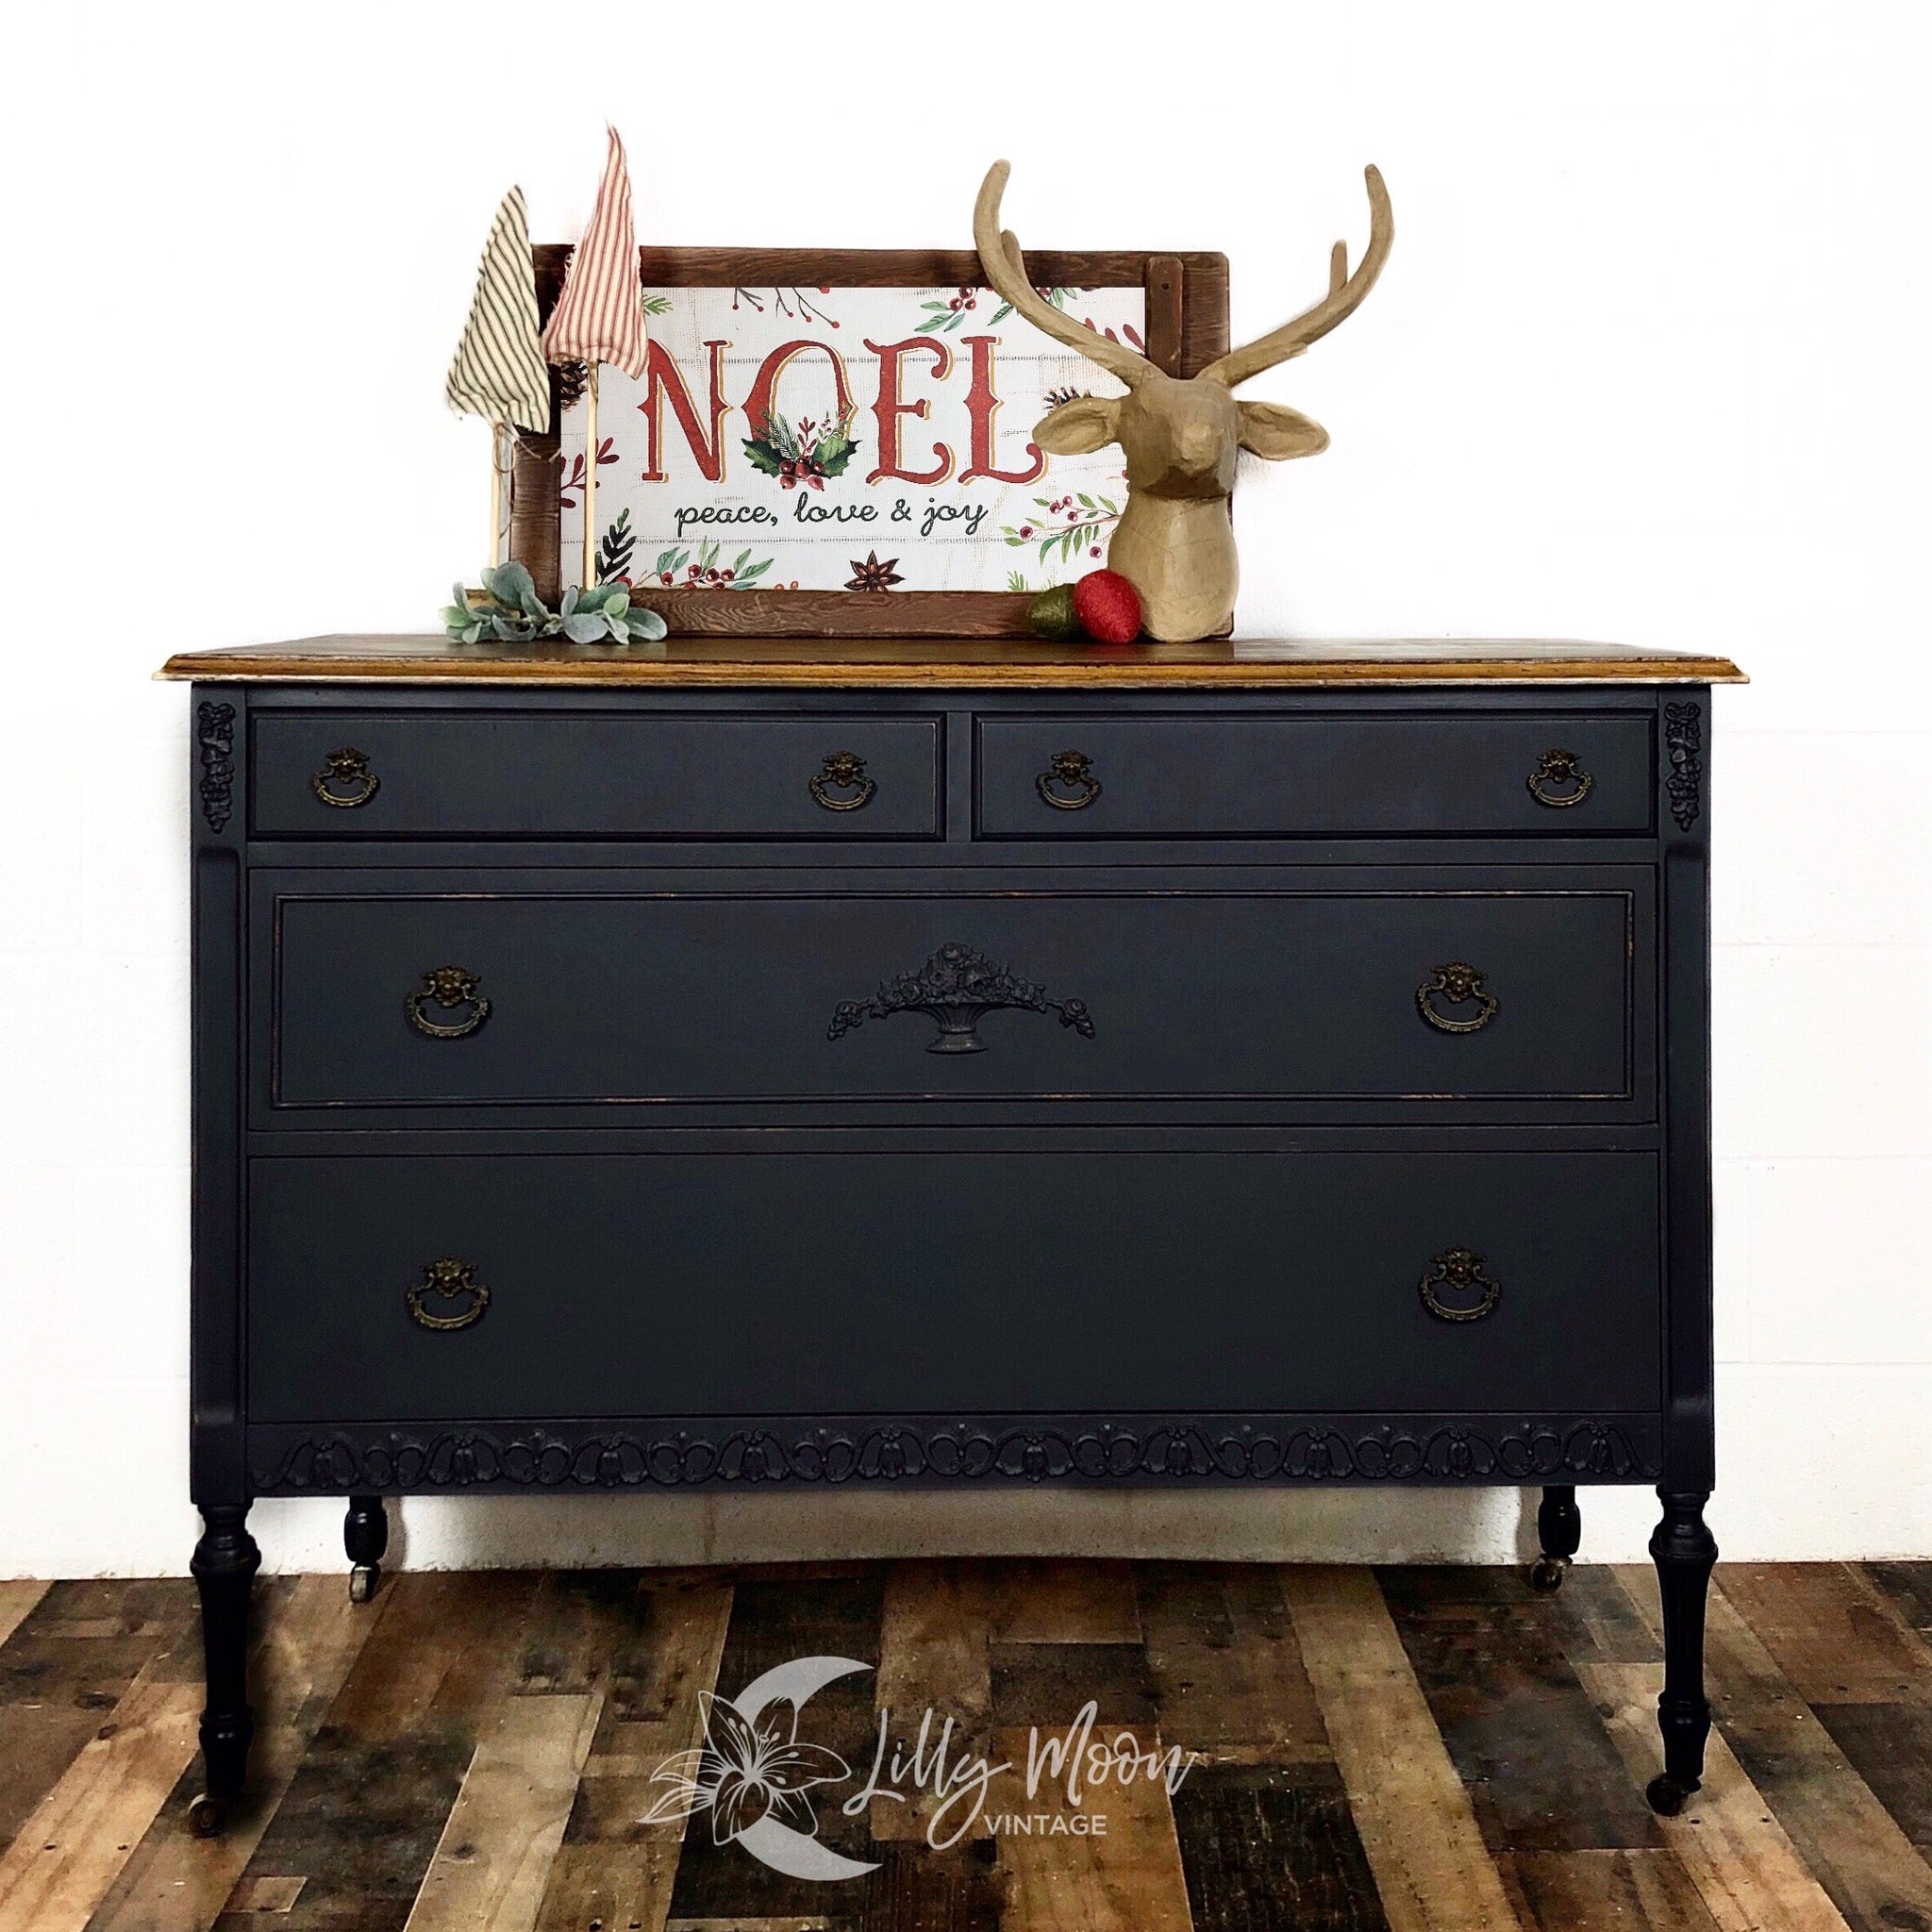 A vintage 4-drawer dresser refurbished by Lilly Moon Vintage is painted in Dixie Belle's Midnight Sky chalk mineral paint and has a natural wood top.